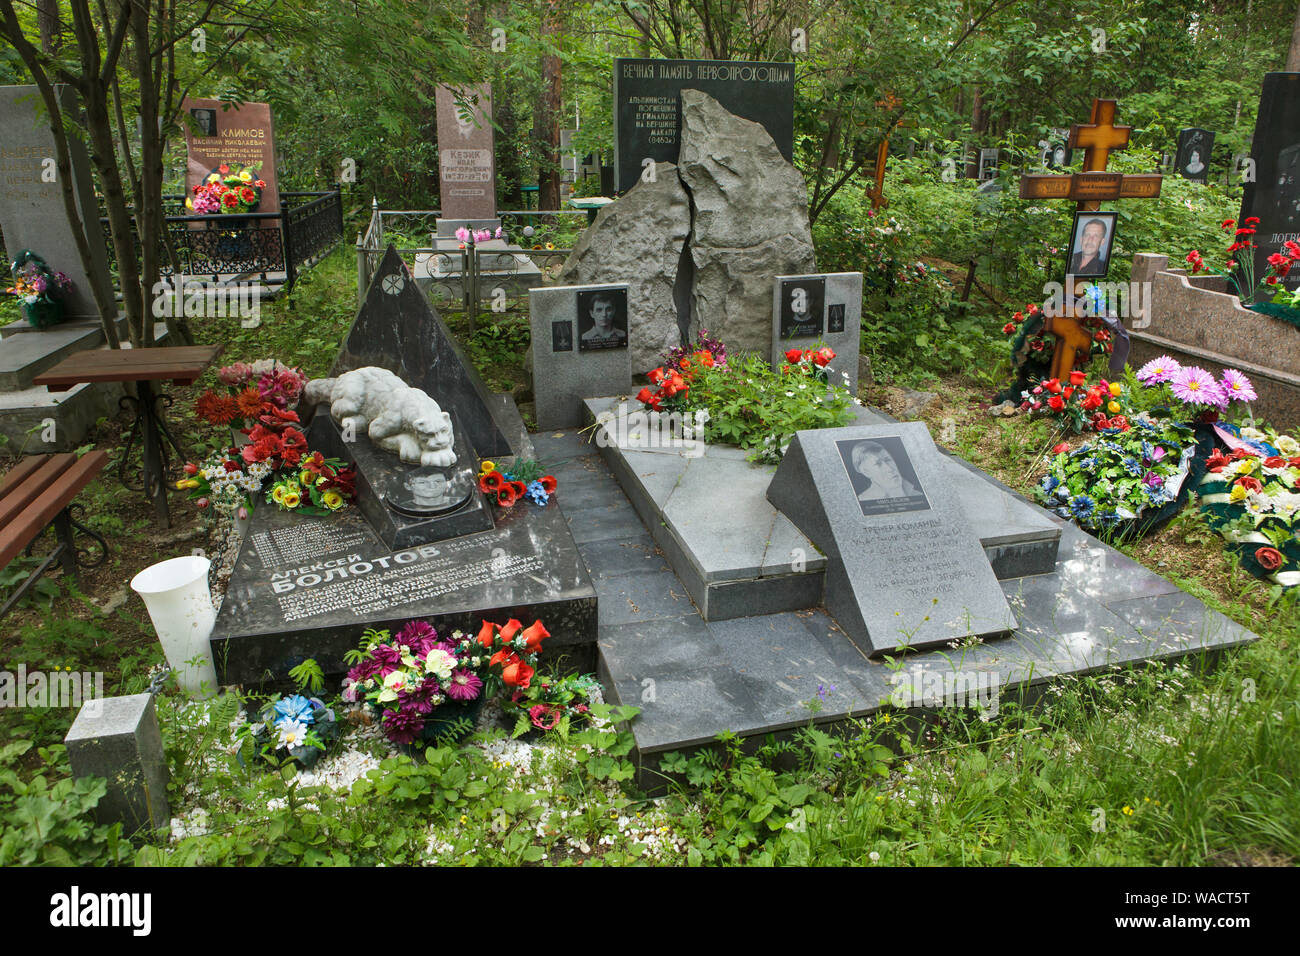 Grave of Russian mountaineer Alexei Bolotov (1962 - 2013) and the cenotaph to Russian mountaineers Salavat Khabibullin (1961 - 1997) and Igor Bugachevski (1962 - 1997) who died in the Himalayas at Shirokorechenskoye Cemetery in Yekaterinburg, Russia. Alexei Bolotov died in 2013 during the ascent to the south-west face of Mount Everest. Salavat Khabibullin and Igor Bugachevski died during the 1997 Russian Makalu Expedition during the successful ascent to the west face of Mount Makalu in Nepal, and their bodies were left on the mount. Cenotaph to Russian mountaineer Alexander Mikhailov, who was Stock Photo